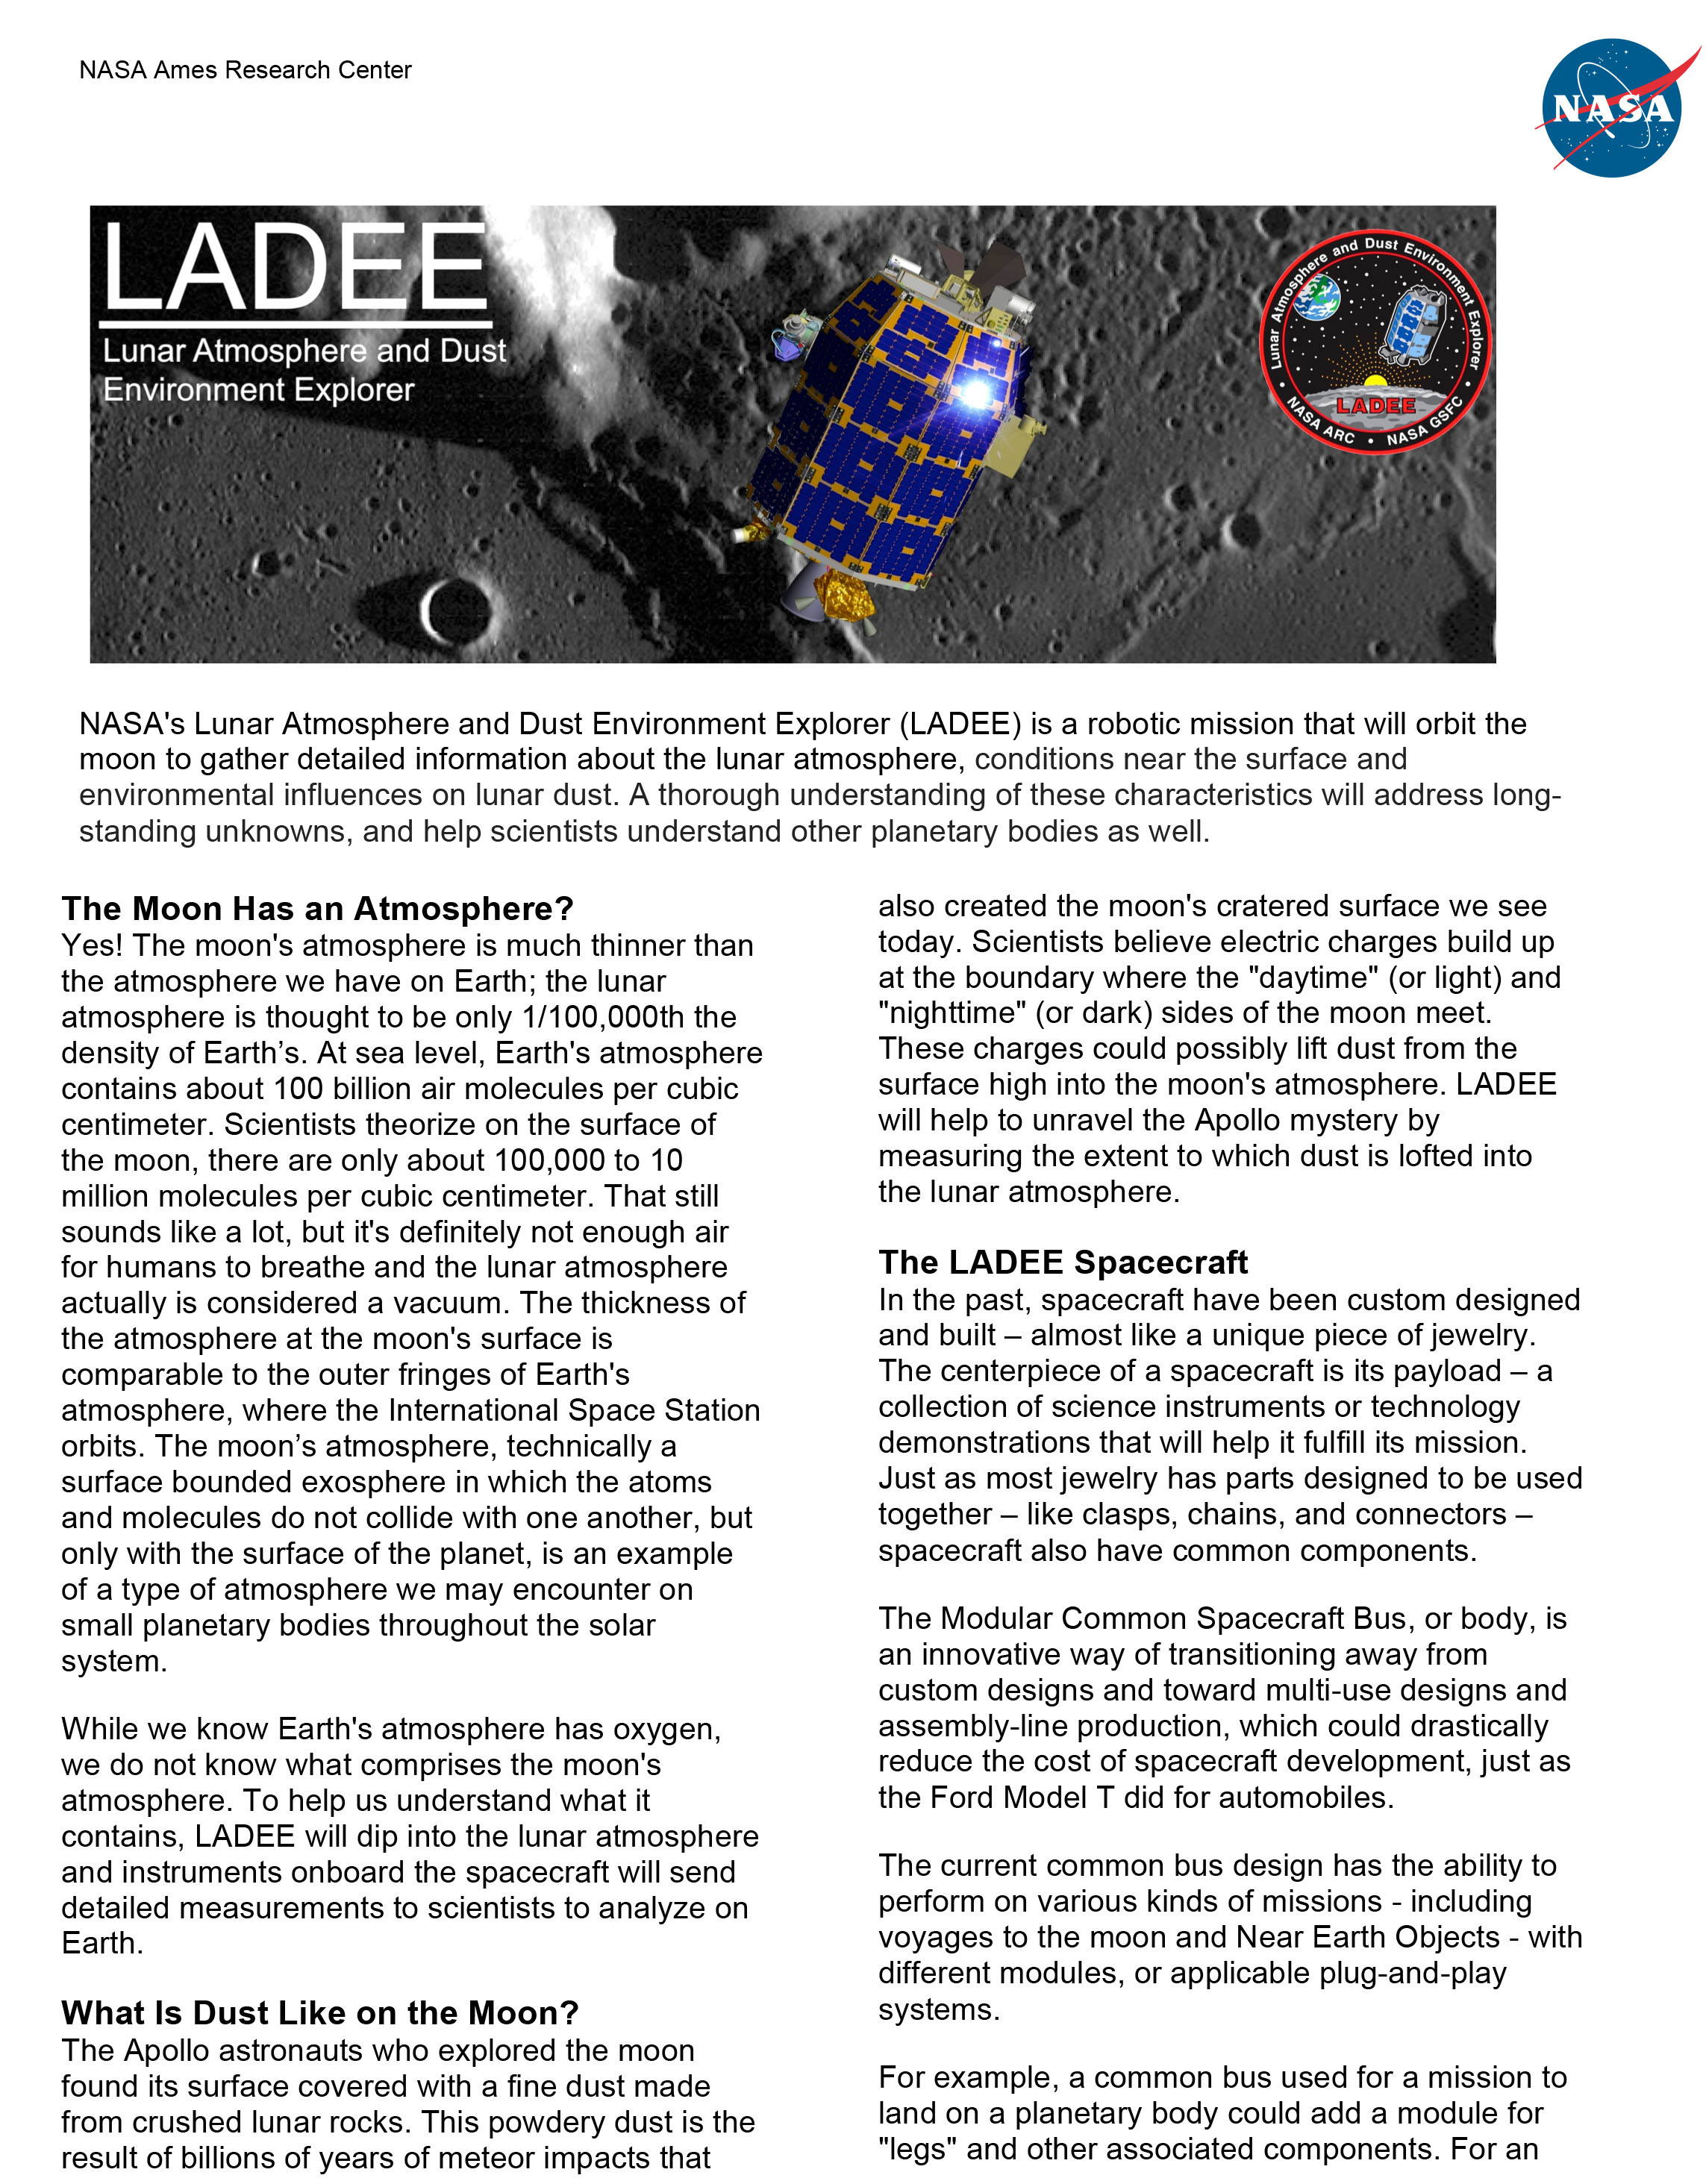 NASA's Lunar Atmosphere and Dust Environment Explorer (LADEE) is a robotic mission that will orbit the moon to gather detailed information about the lunar atmosphere, conditions near the surface and environmental influences on lunar dust. 